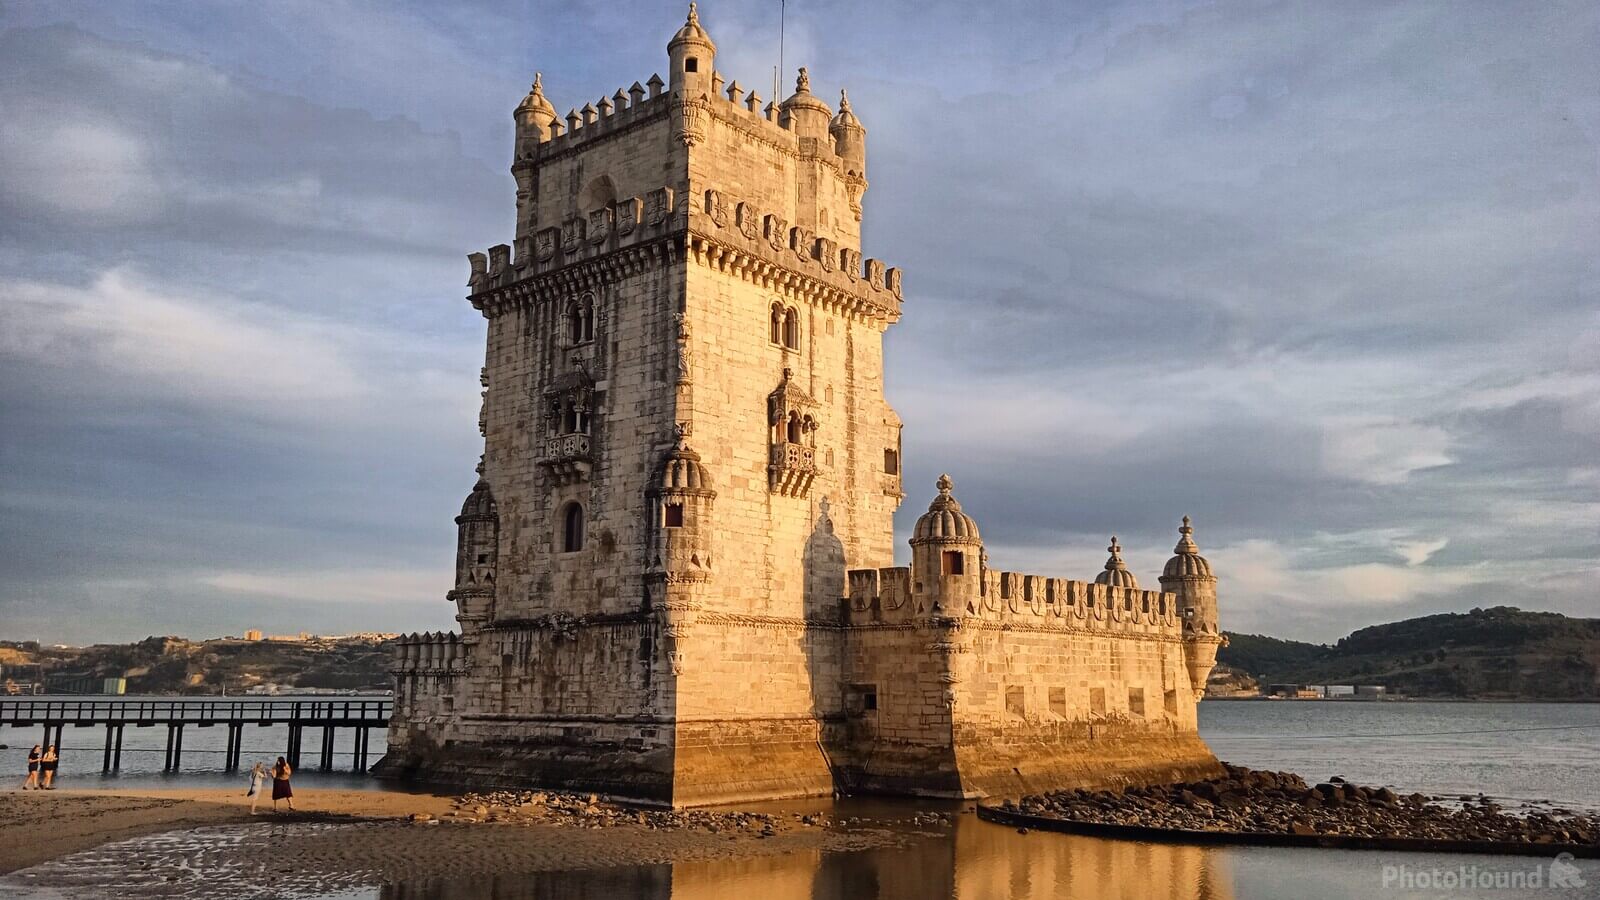 Image of Belem Tower by David Lally